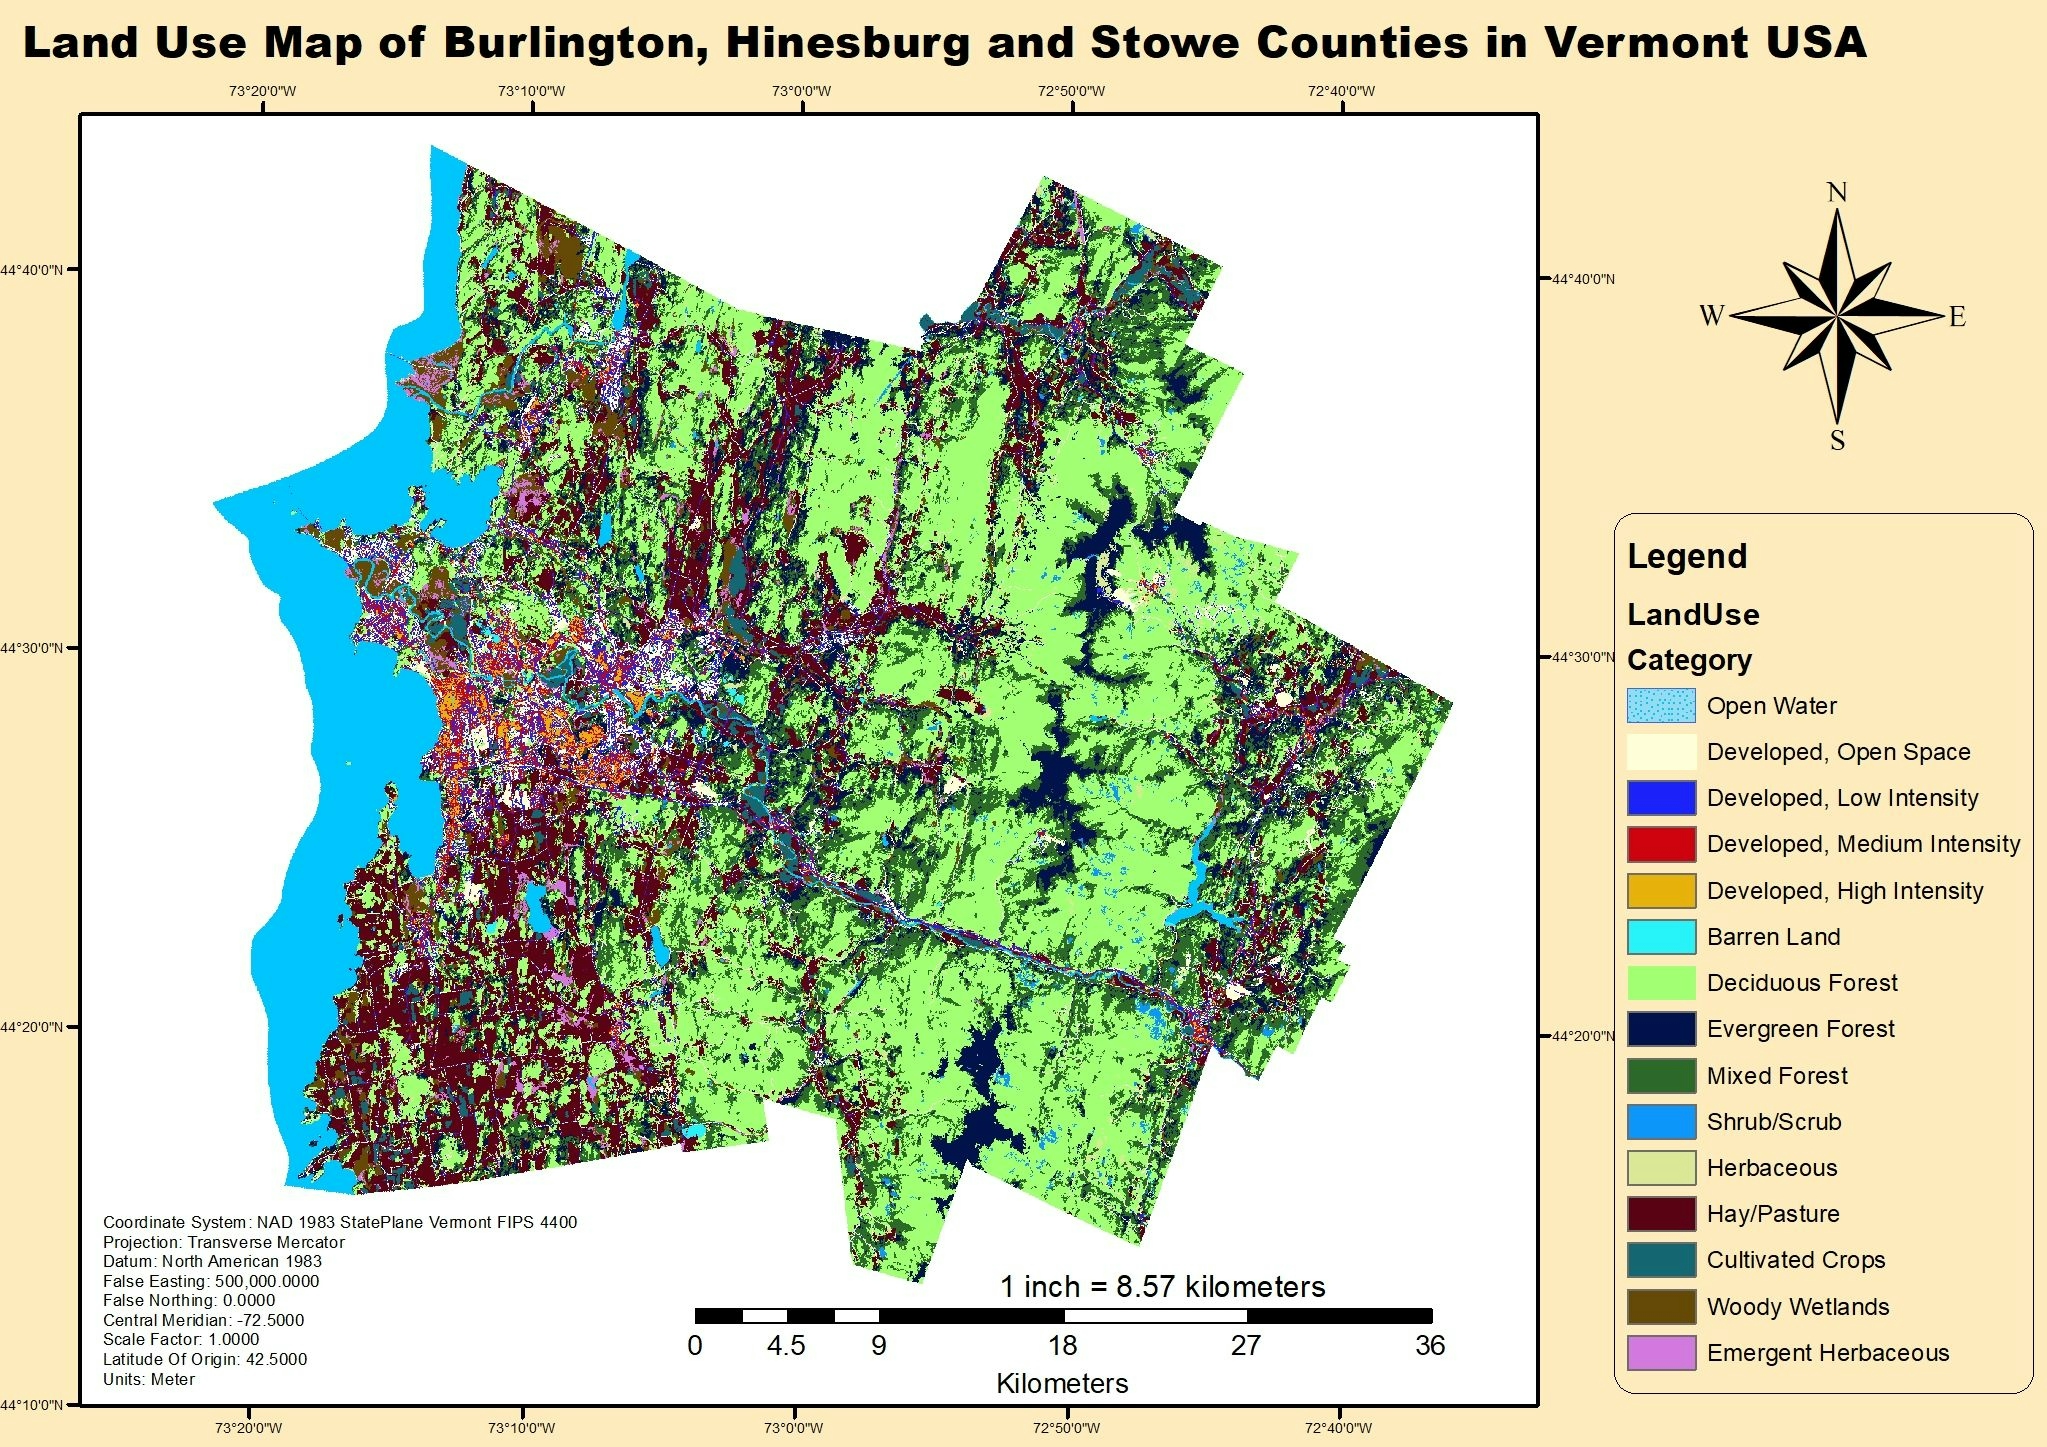 Land Use map of Vermont USA